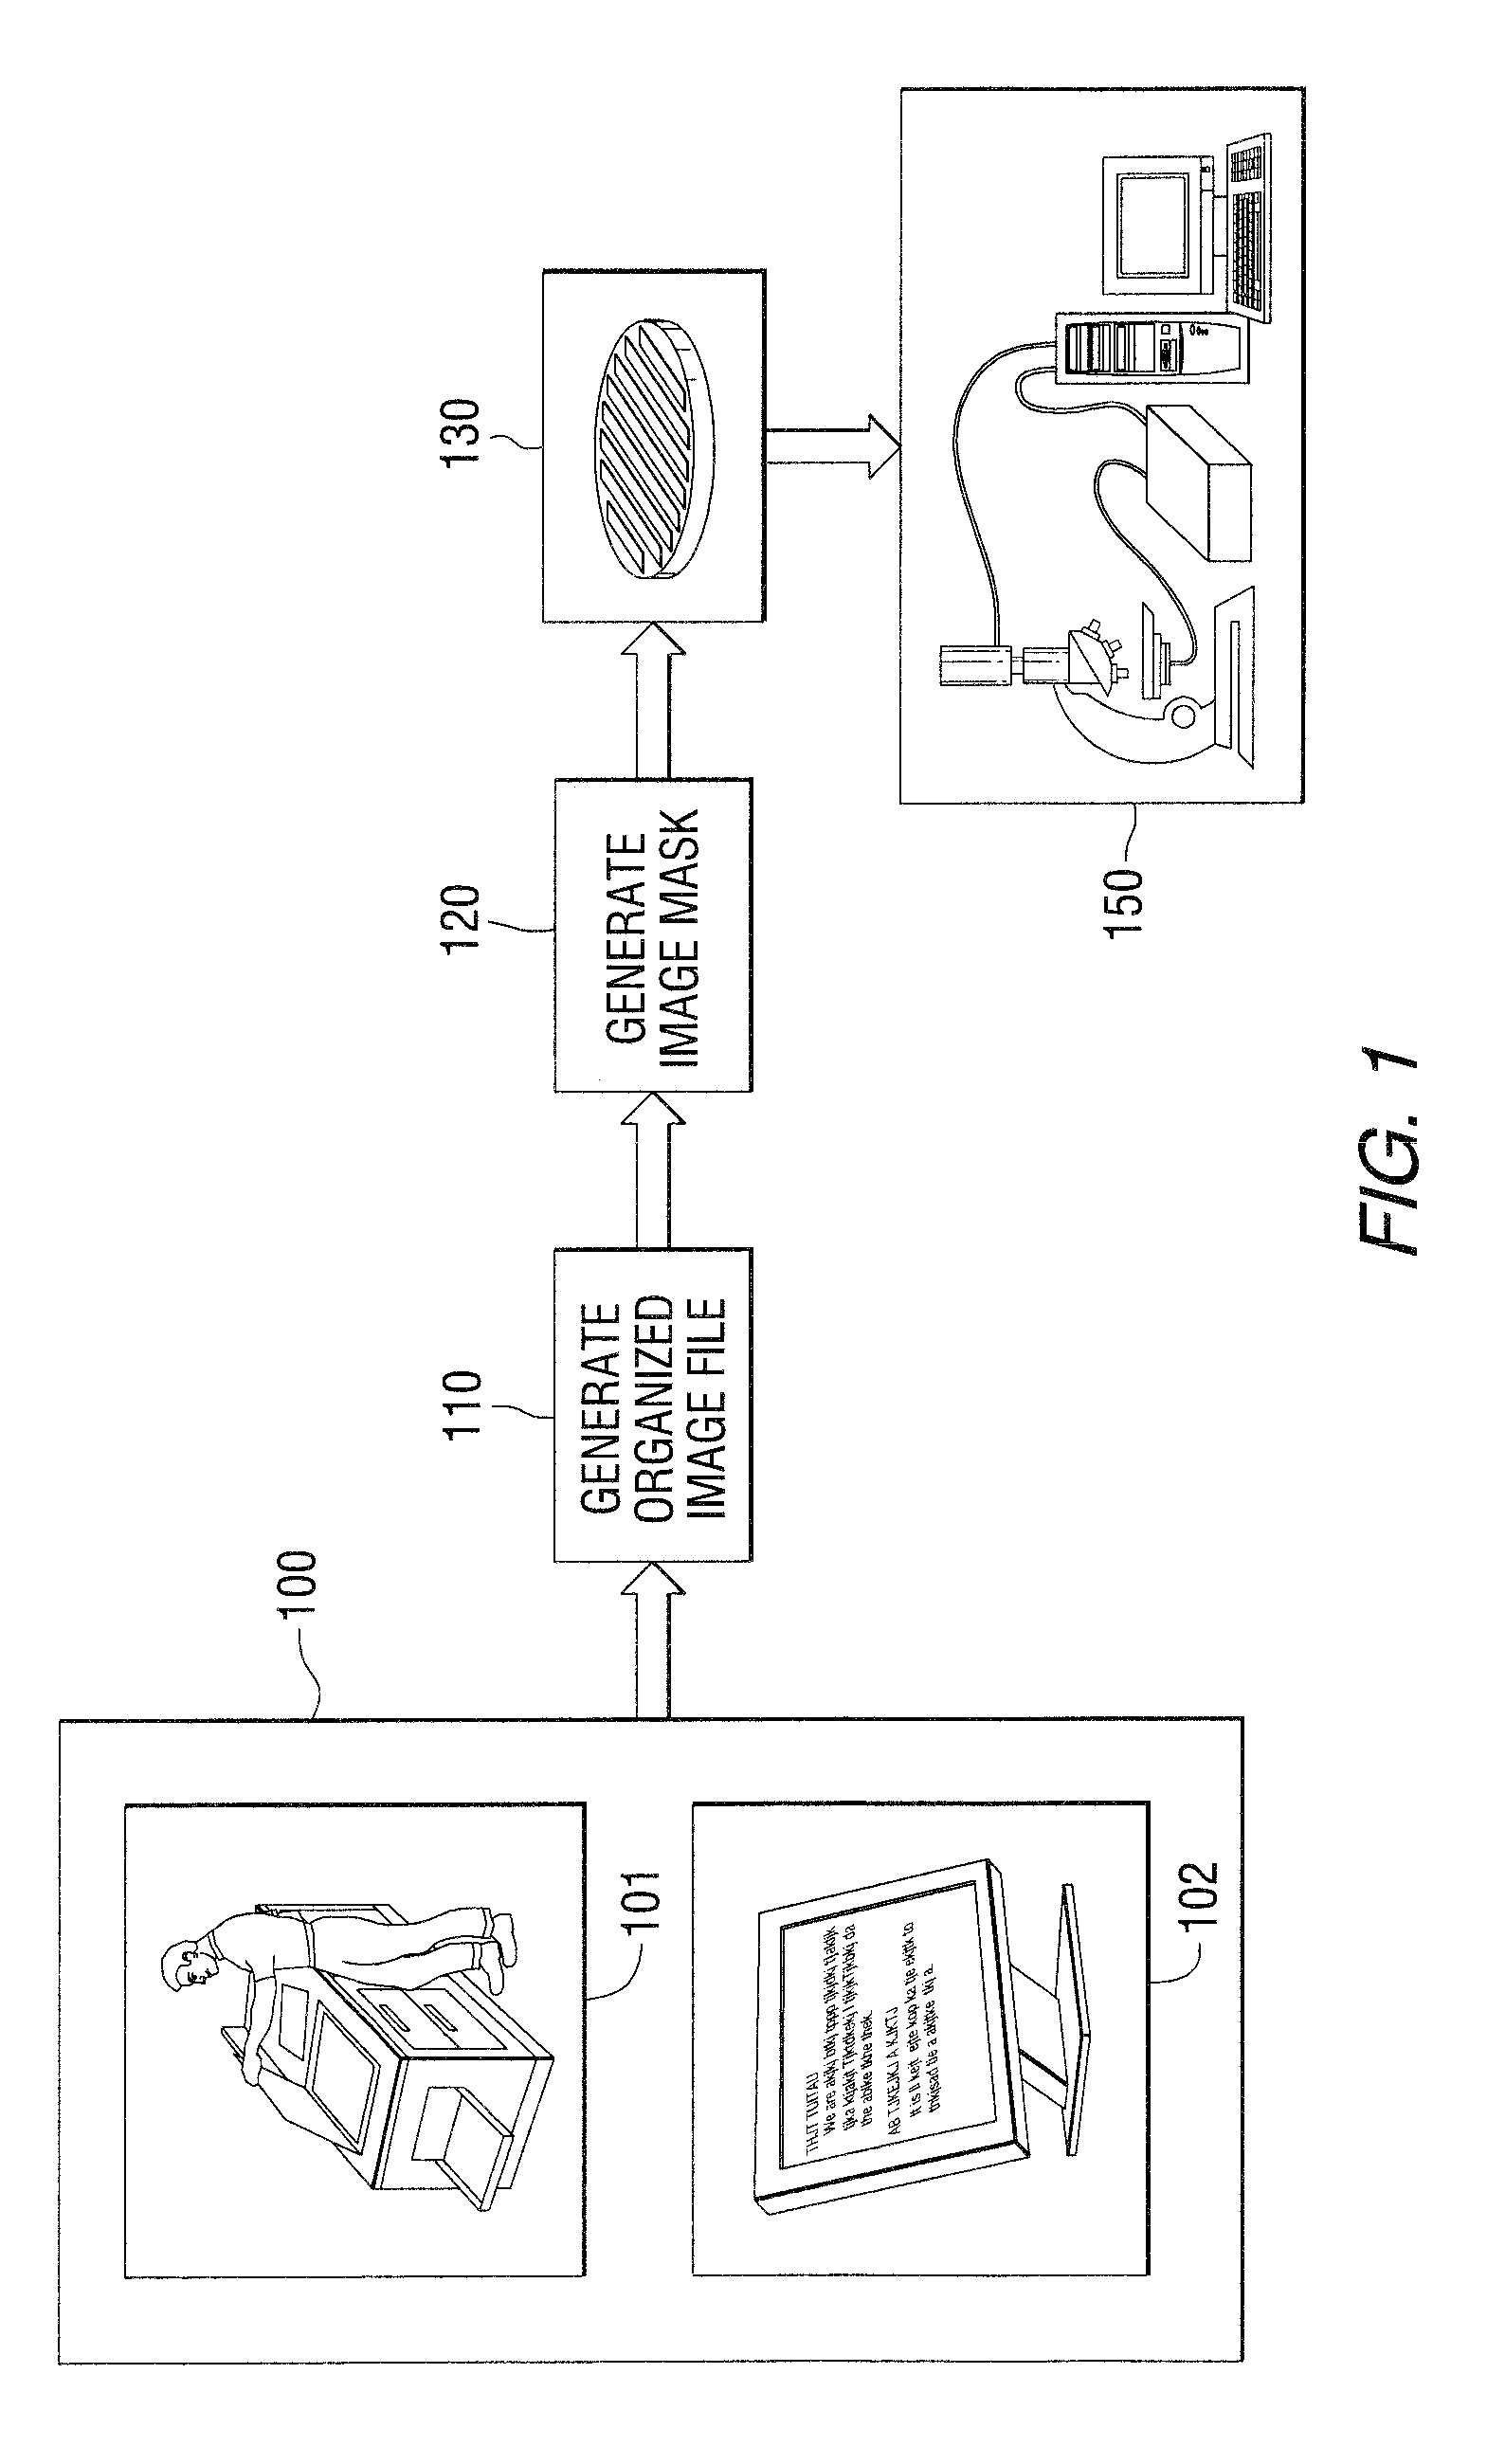 Wafer-scale image archiving and receiving system